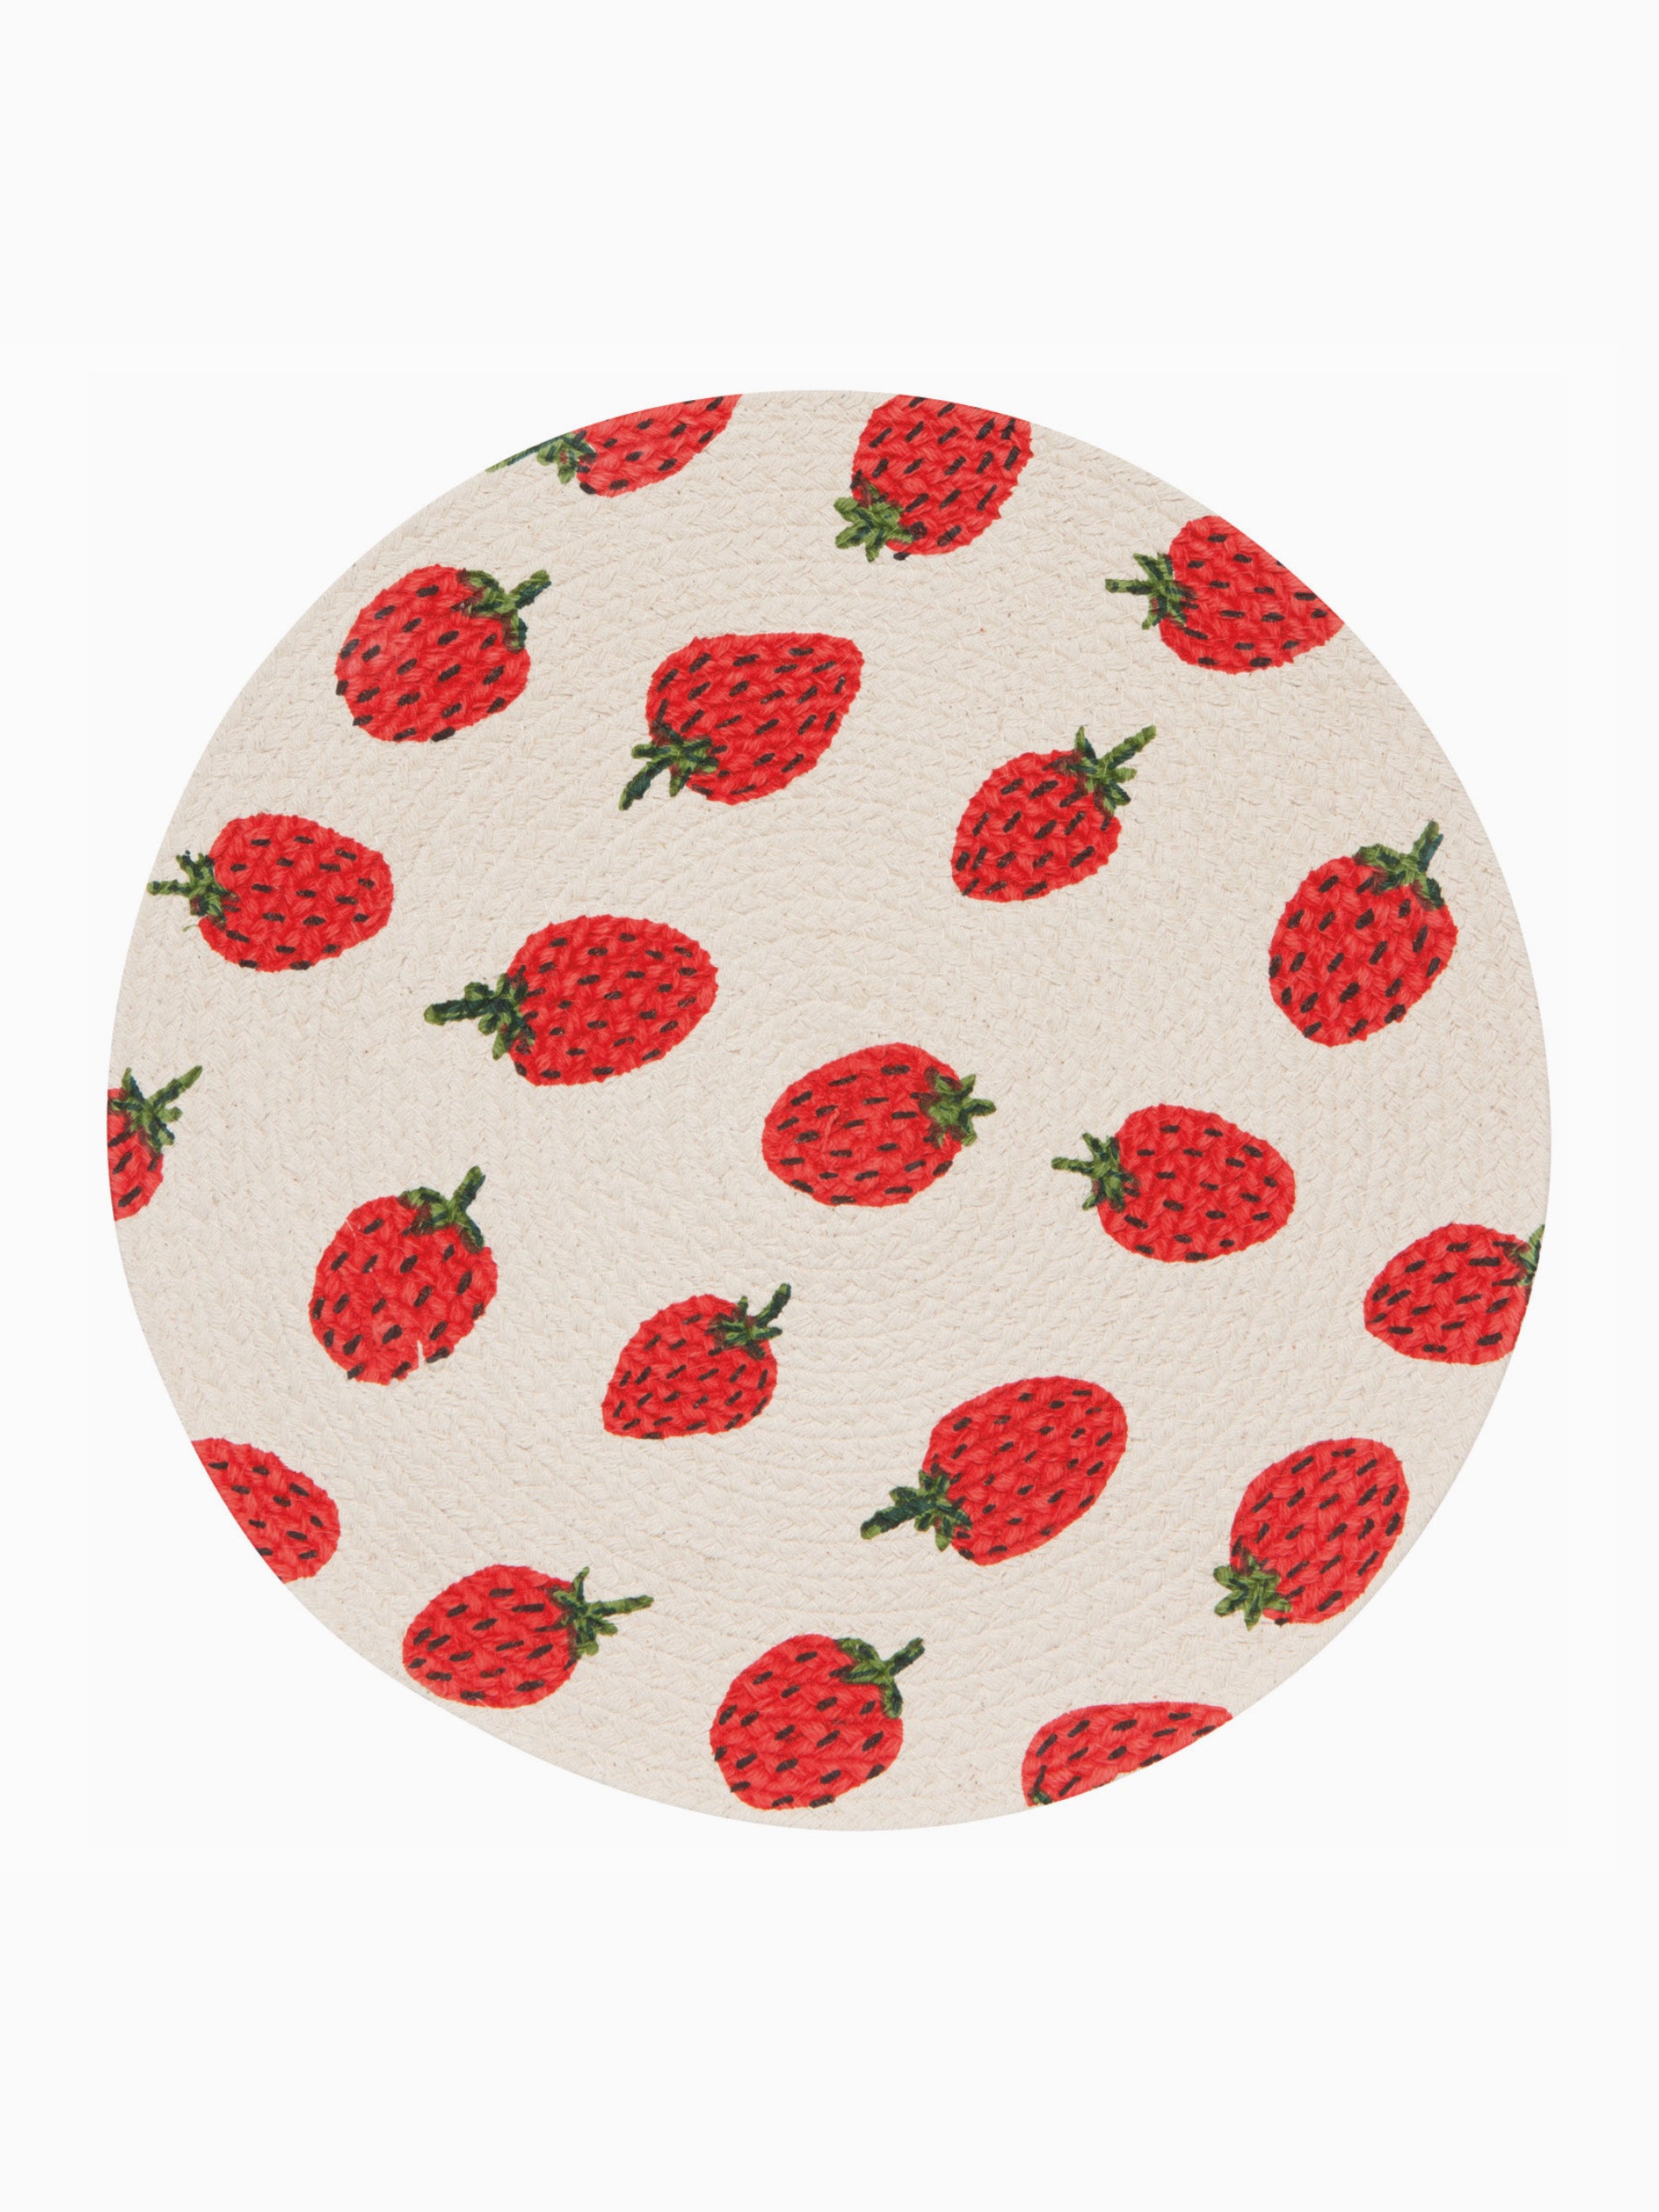 berry sweet braided round placemat